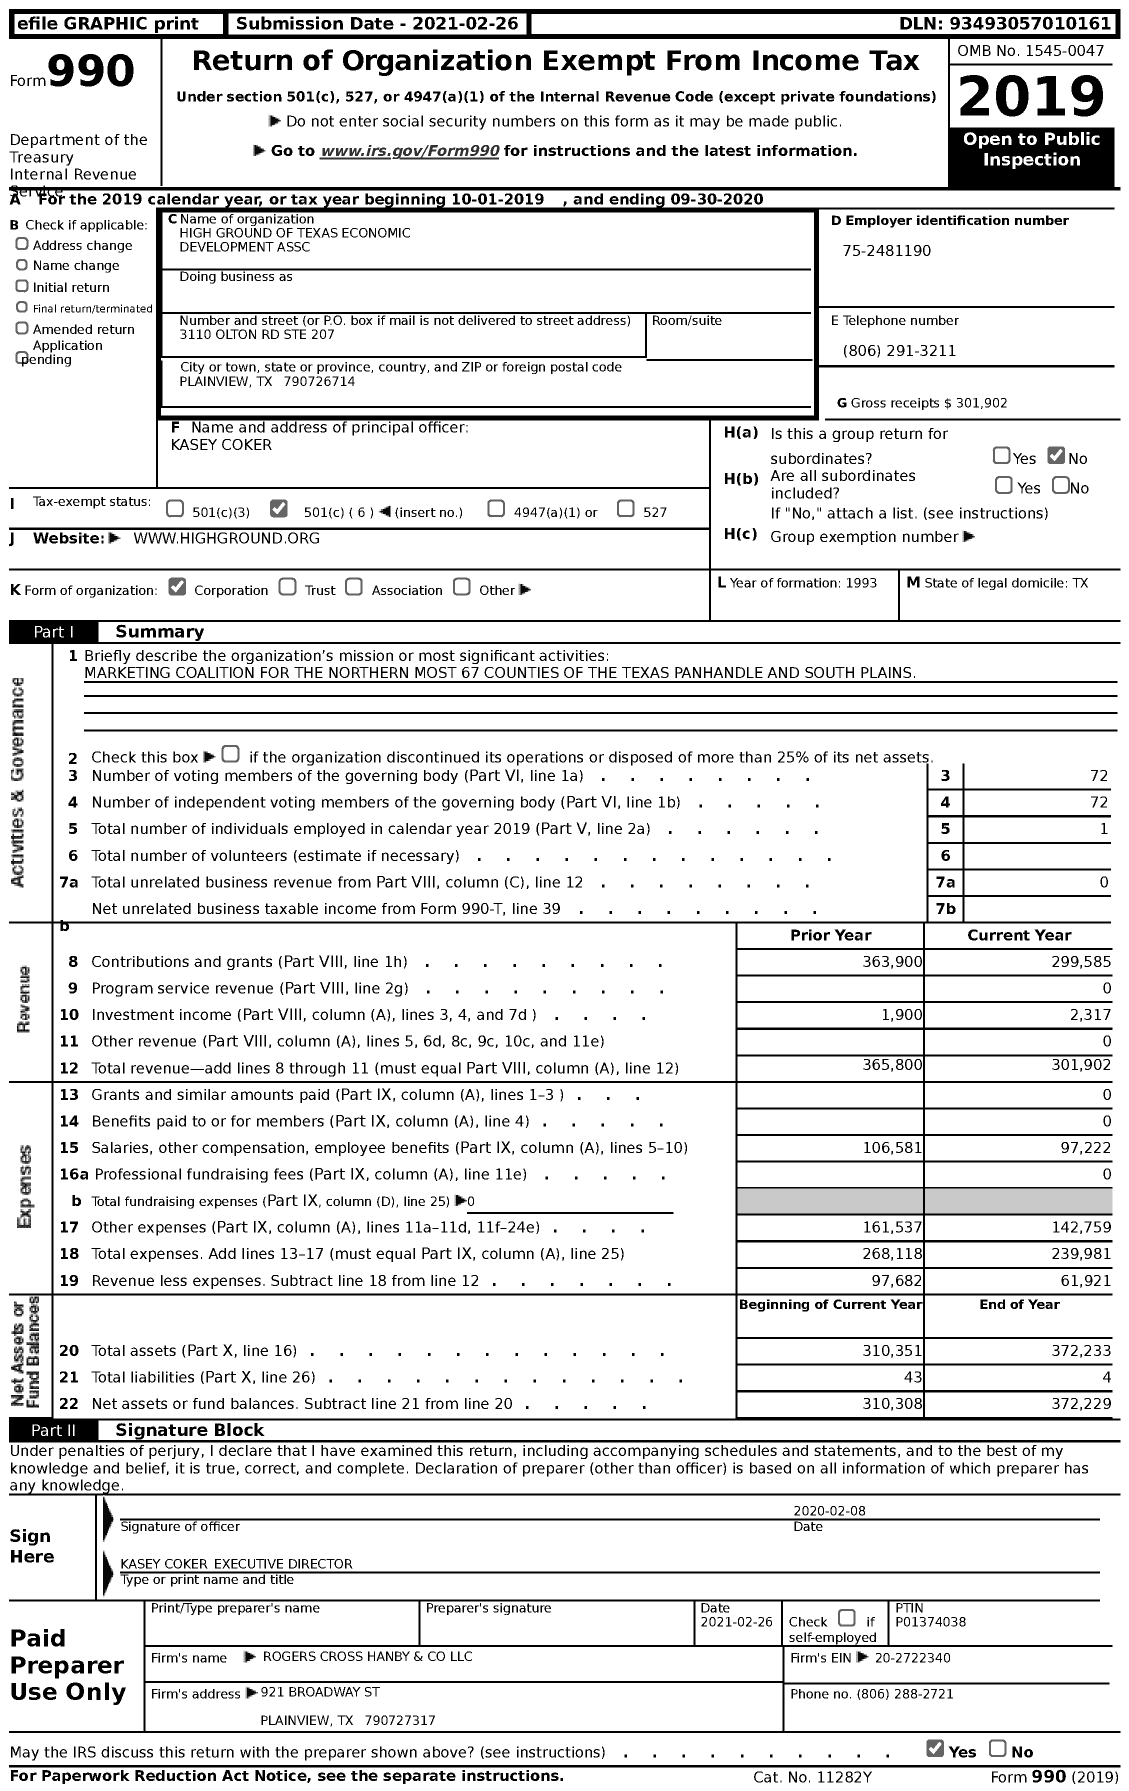 Image of first page of 2019 Form 990 for High Ground of Texas Economic Development Association